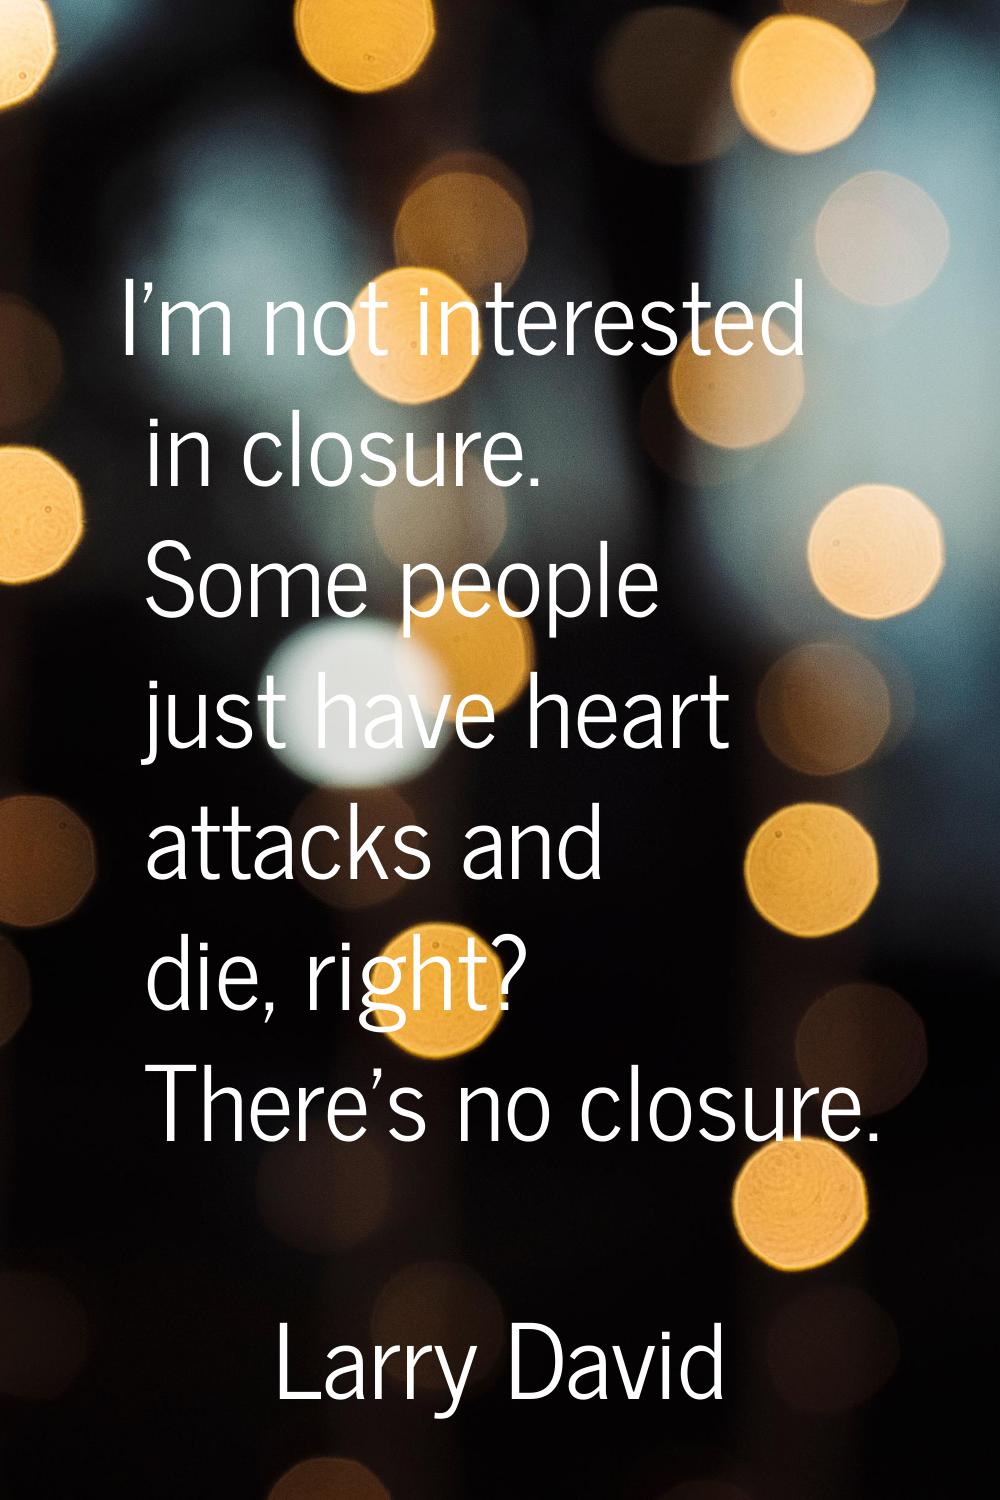 I'm not interested in closure. Some people just have heart attacks and die, right? There's no closu